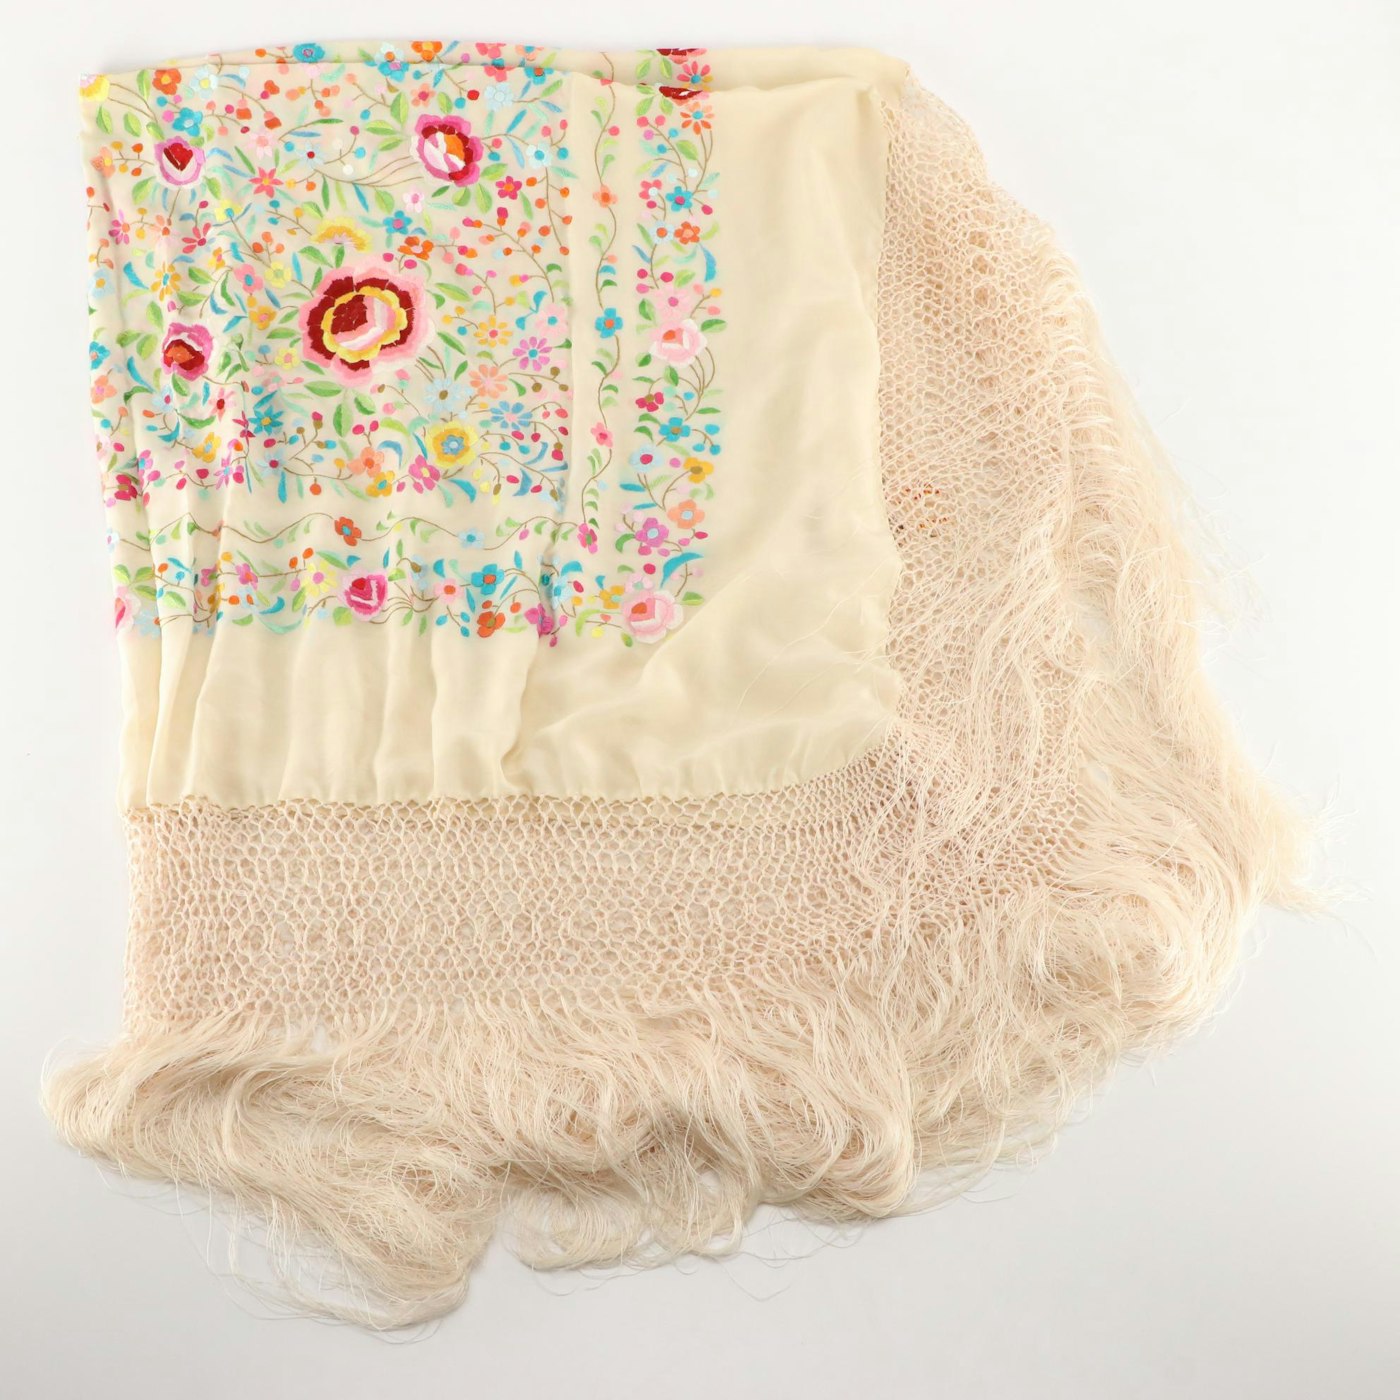 Manton and Other Hand Embroidered Silk Piano Shawls | EBTH